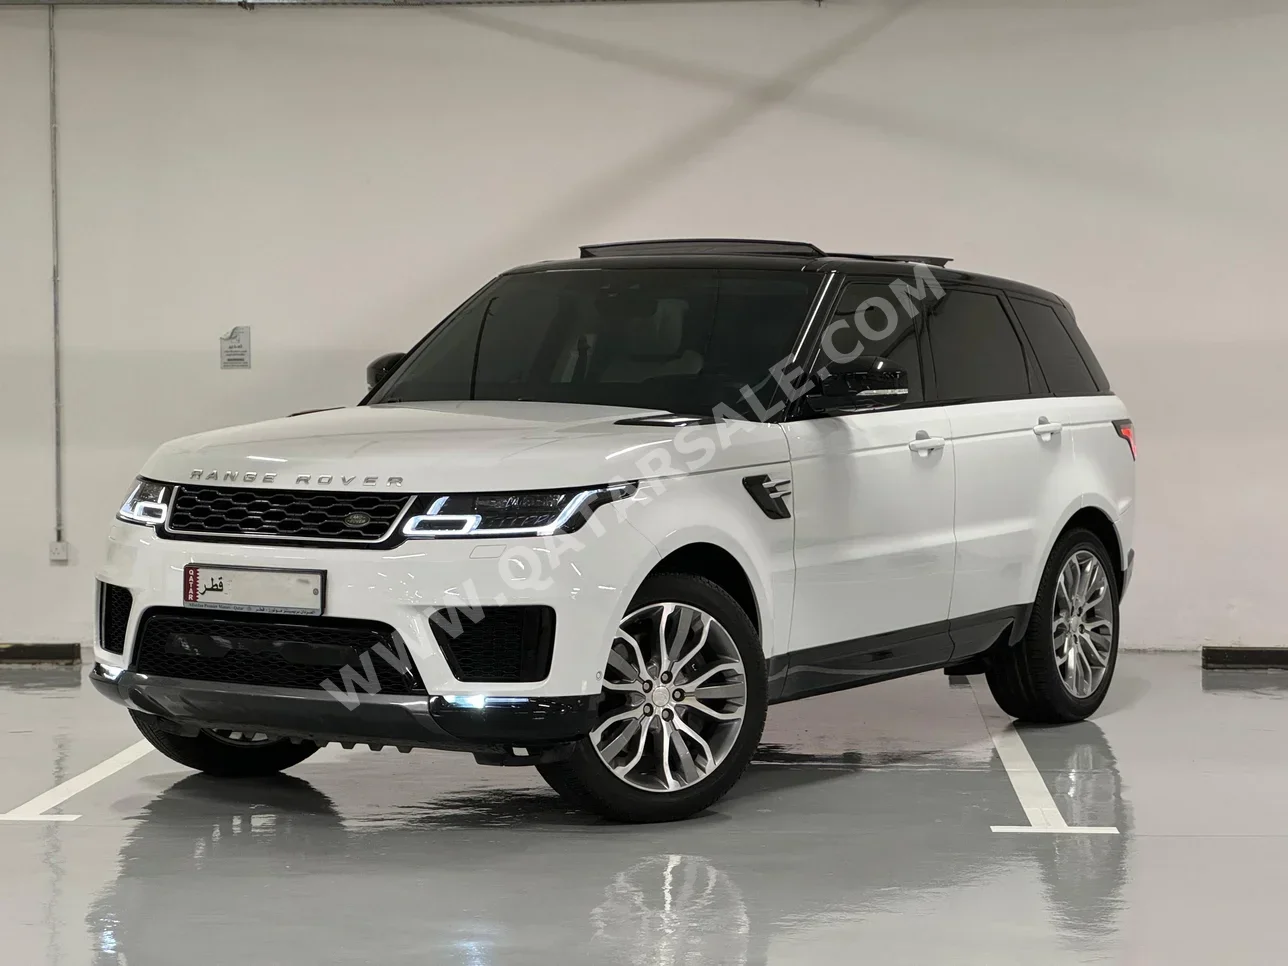  Land Rover  Range Rover  Sport Super charged  2018  Automatic  89,000 Km  6 Cylinder  Four Wheel Drive (4WD)  SUV  White  With Warranty